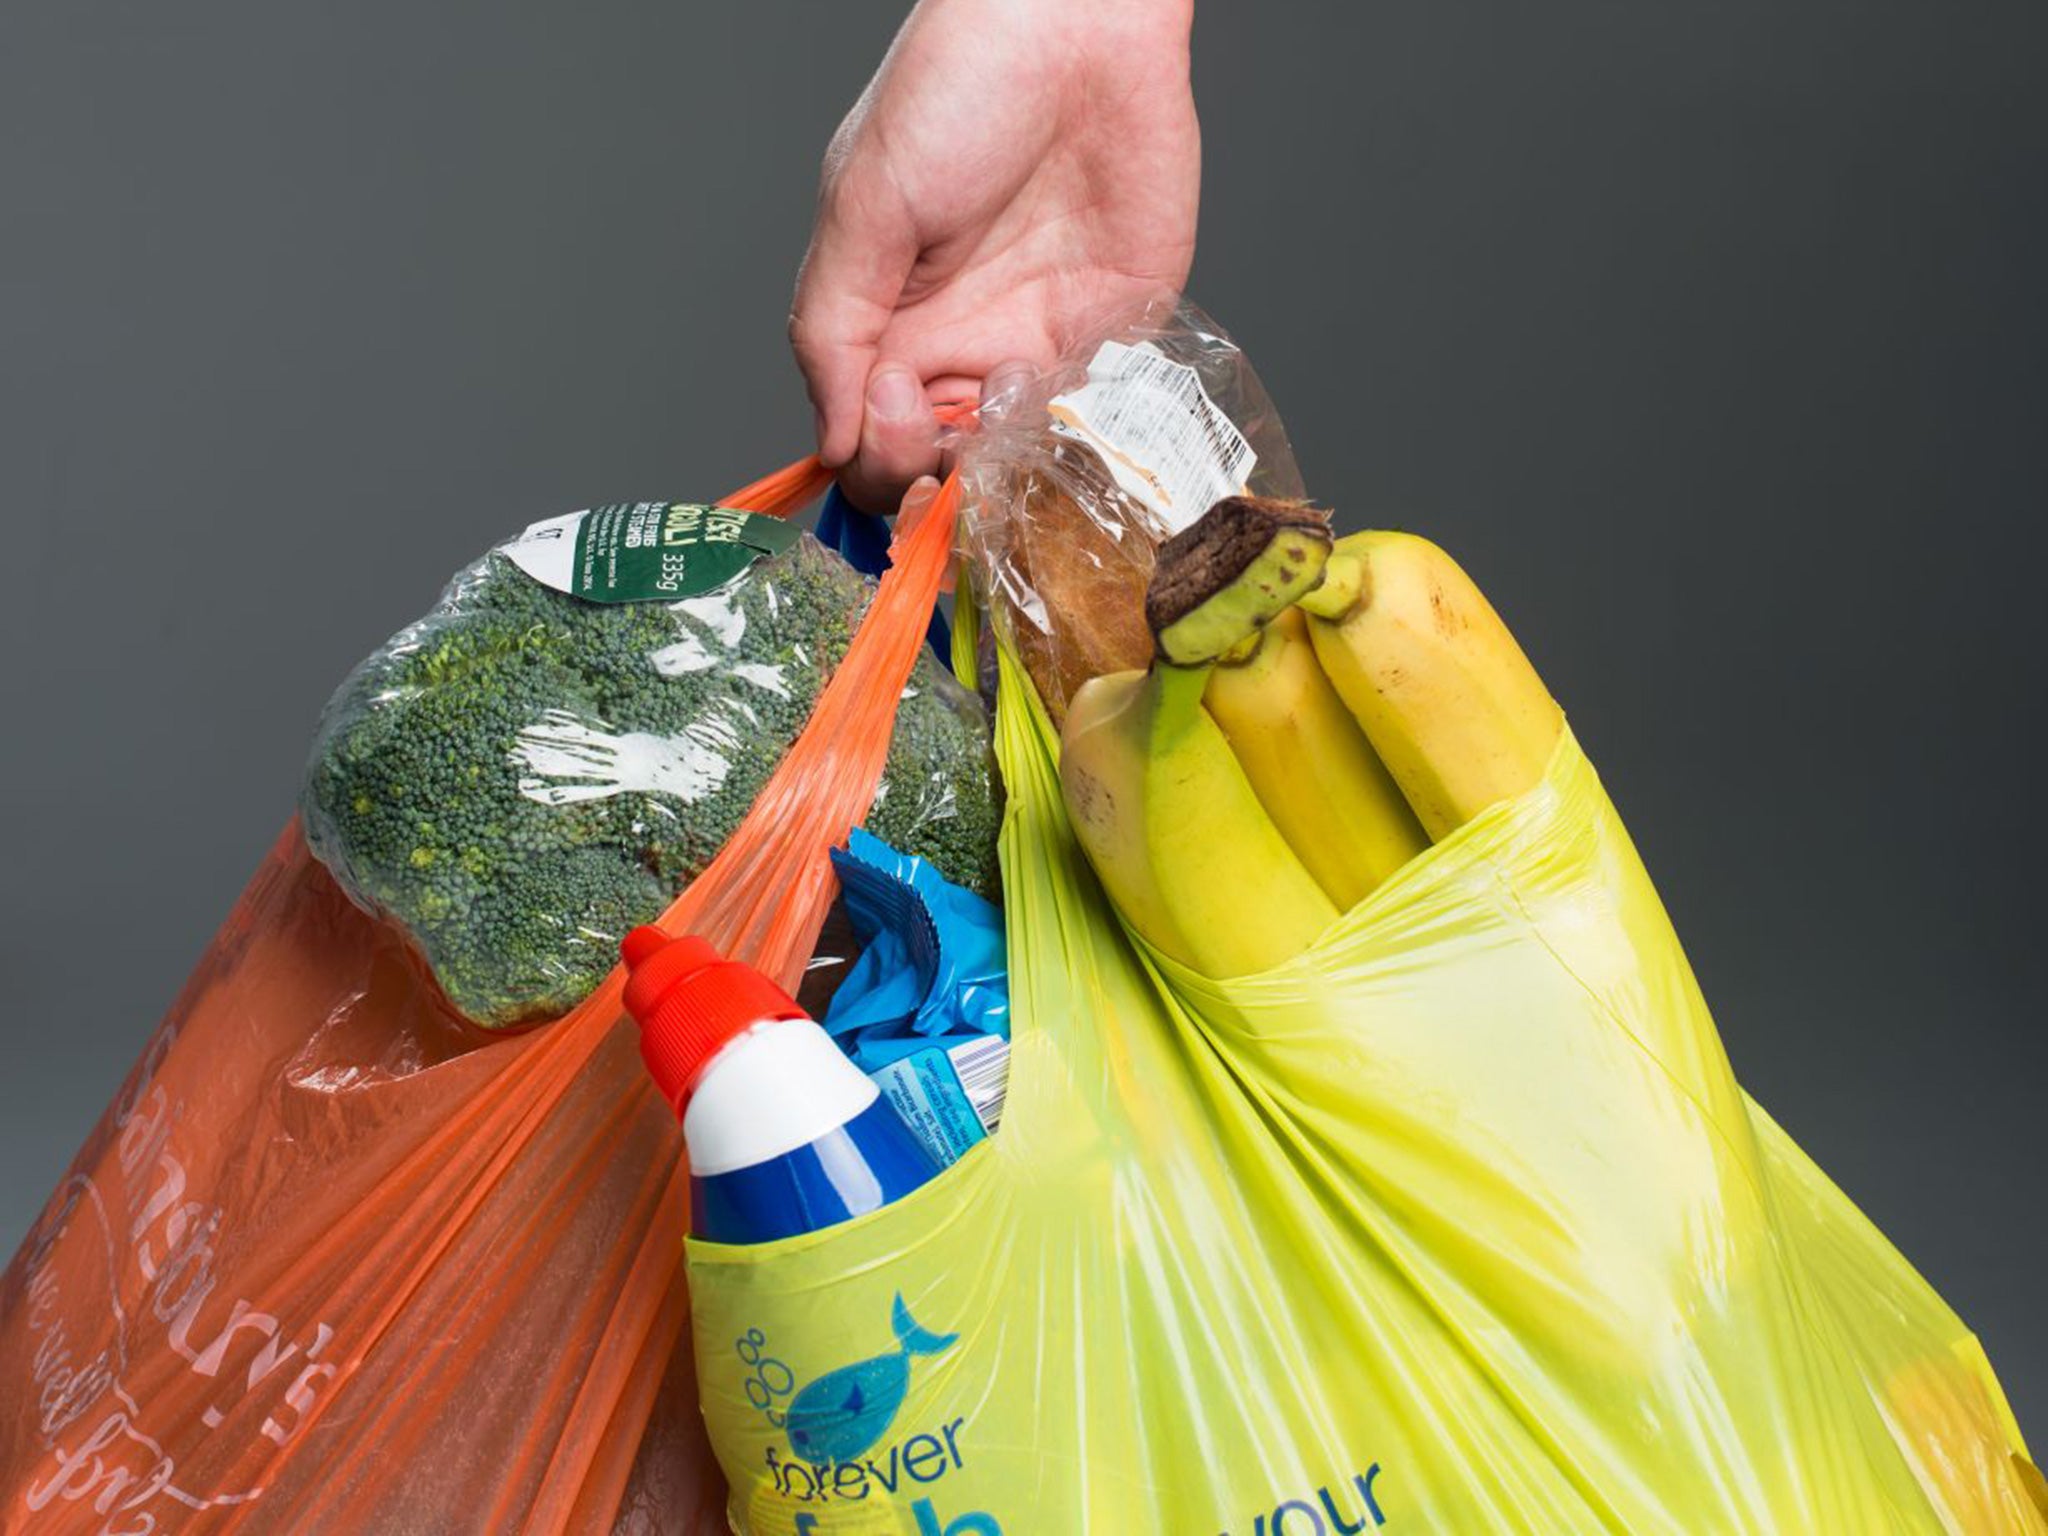 British supermarkets gave out 6.9 billion plastic bags last year